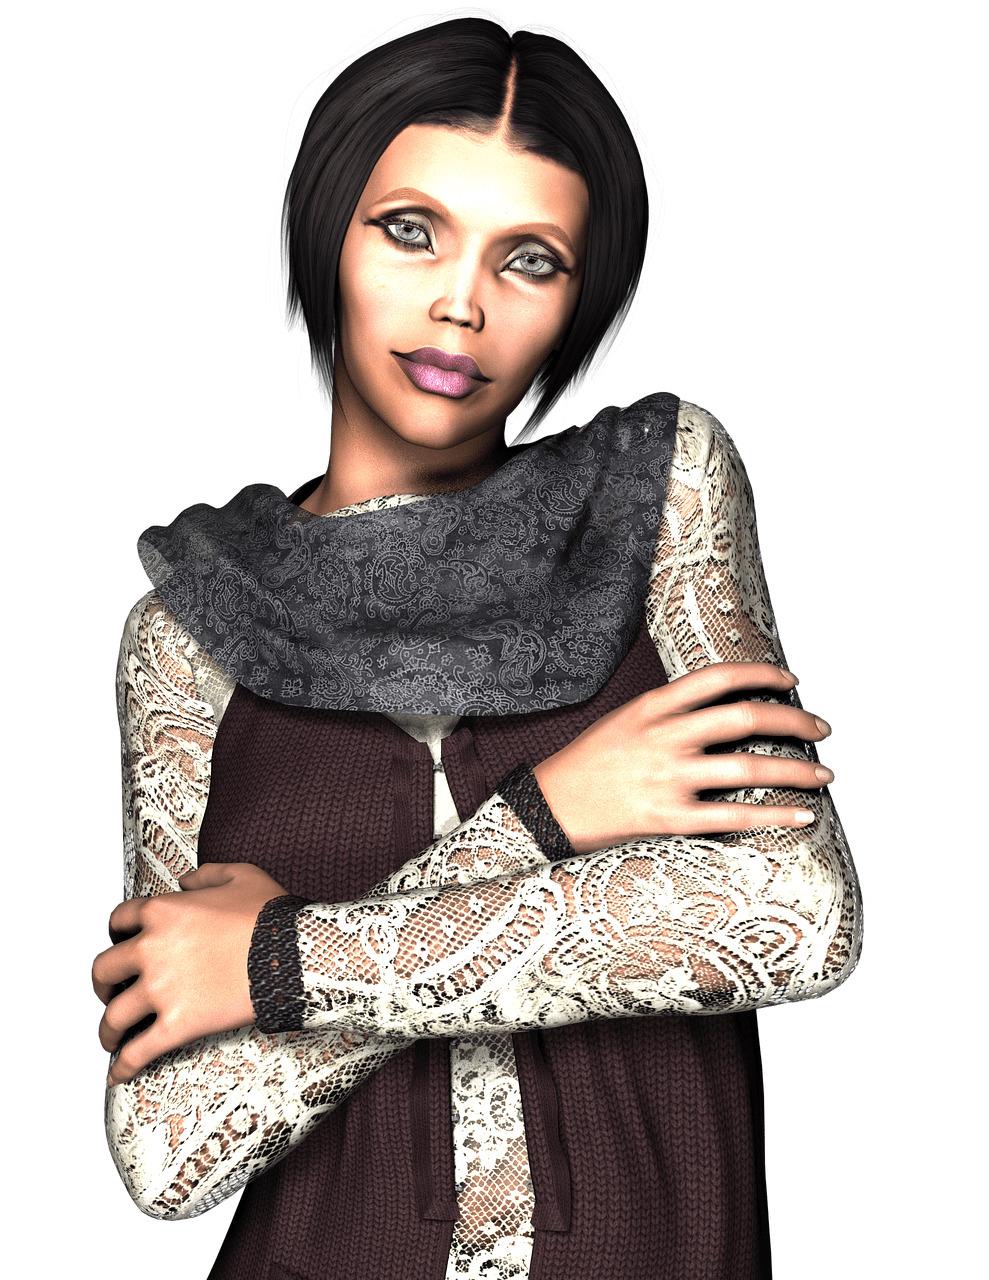 Woman Grey Scarf Arms Crossed png transparent